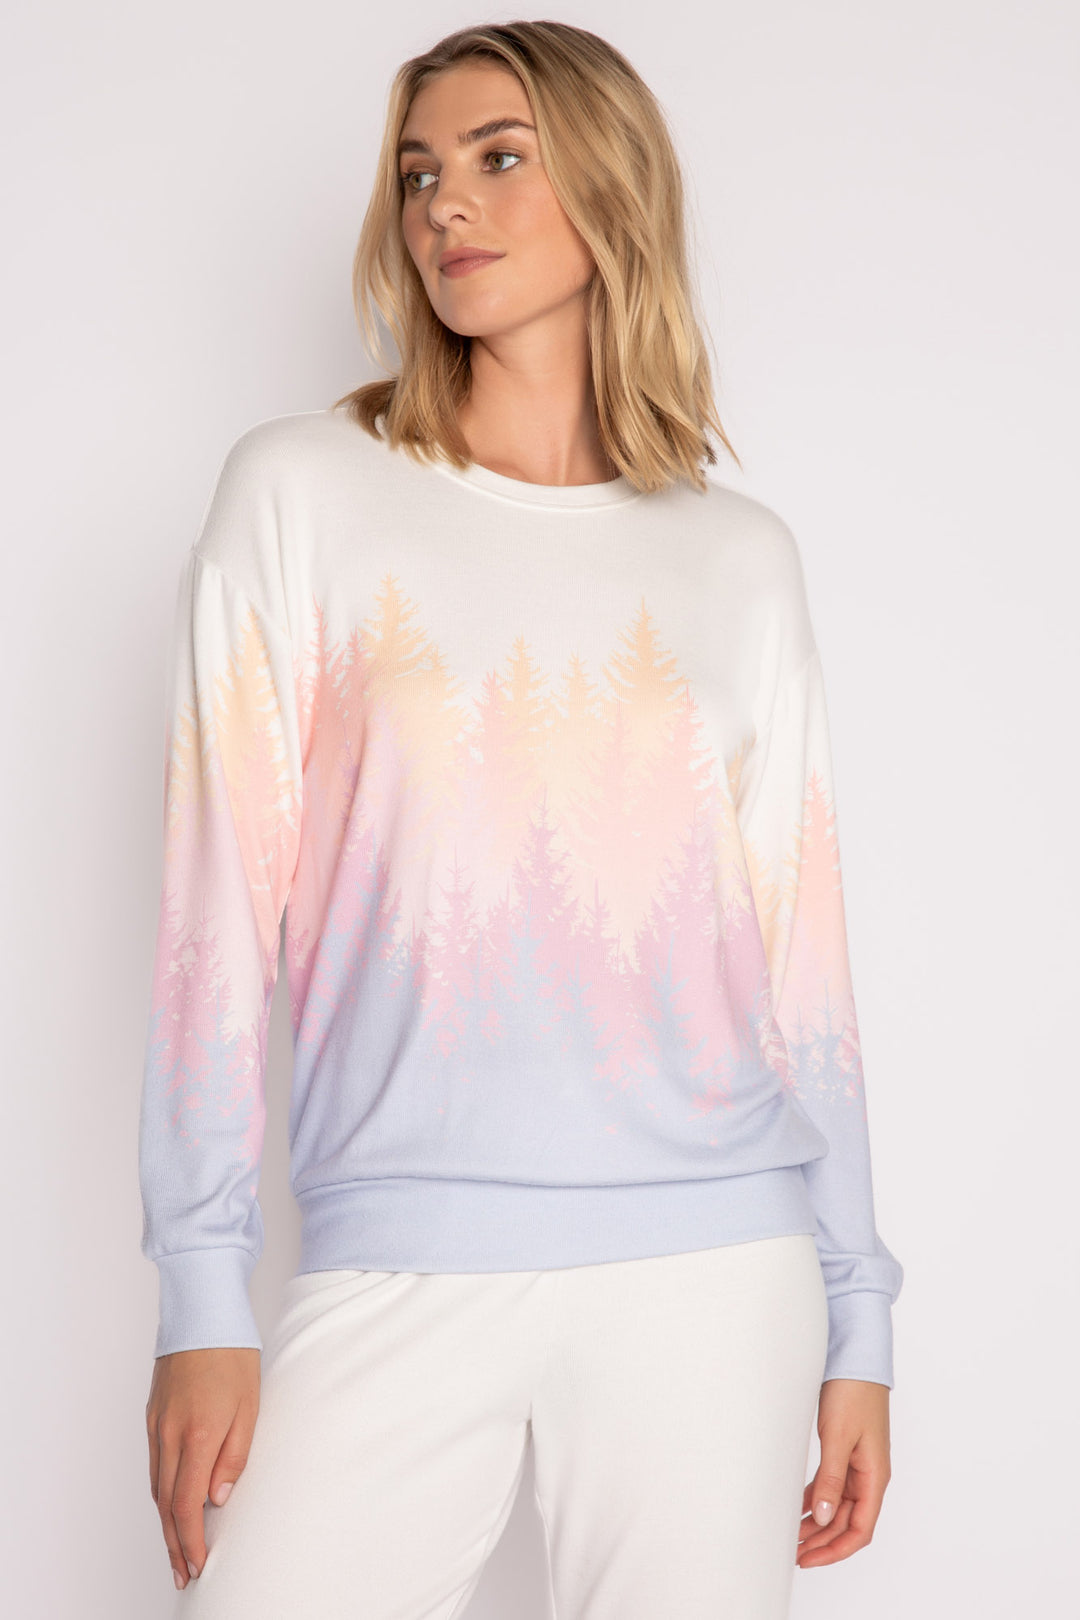 Ivory lounge top with pastel alpine tree-printed graphic on lower body. (7231877972068)